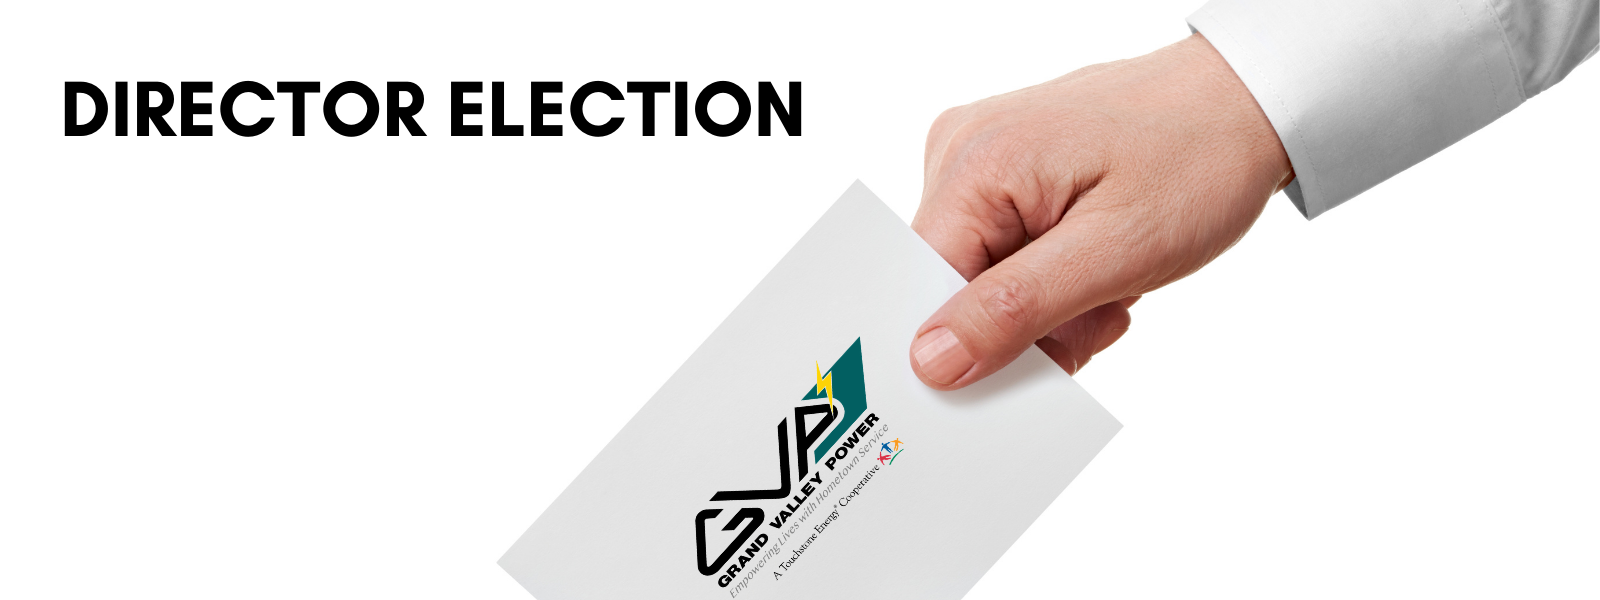 Director elections banner.png